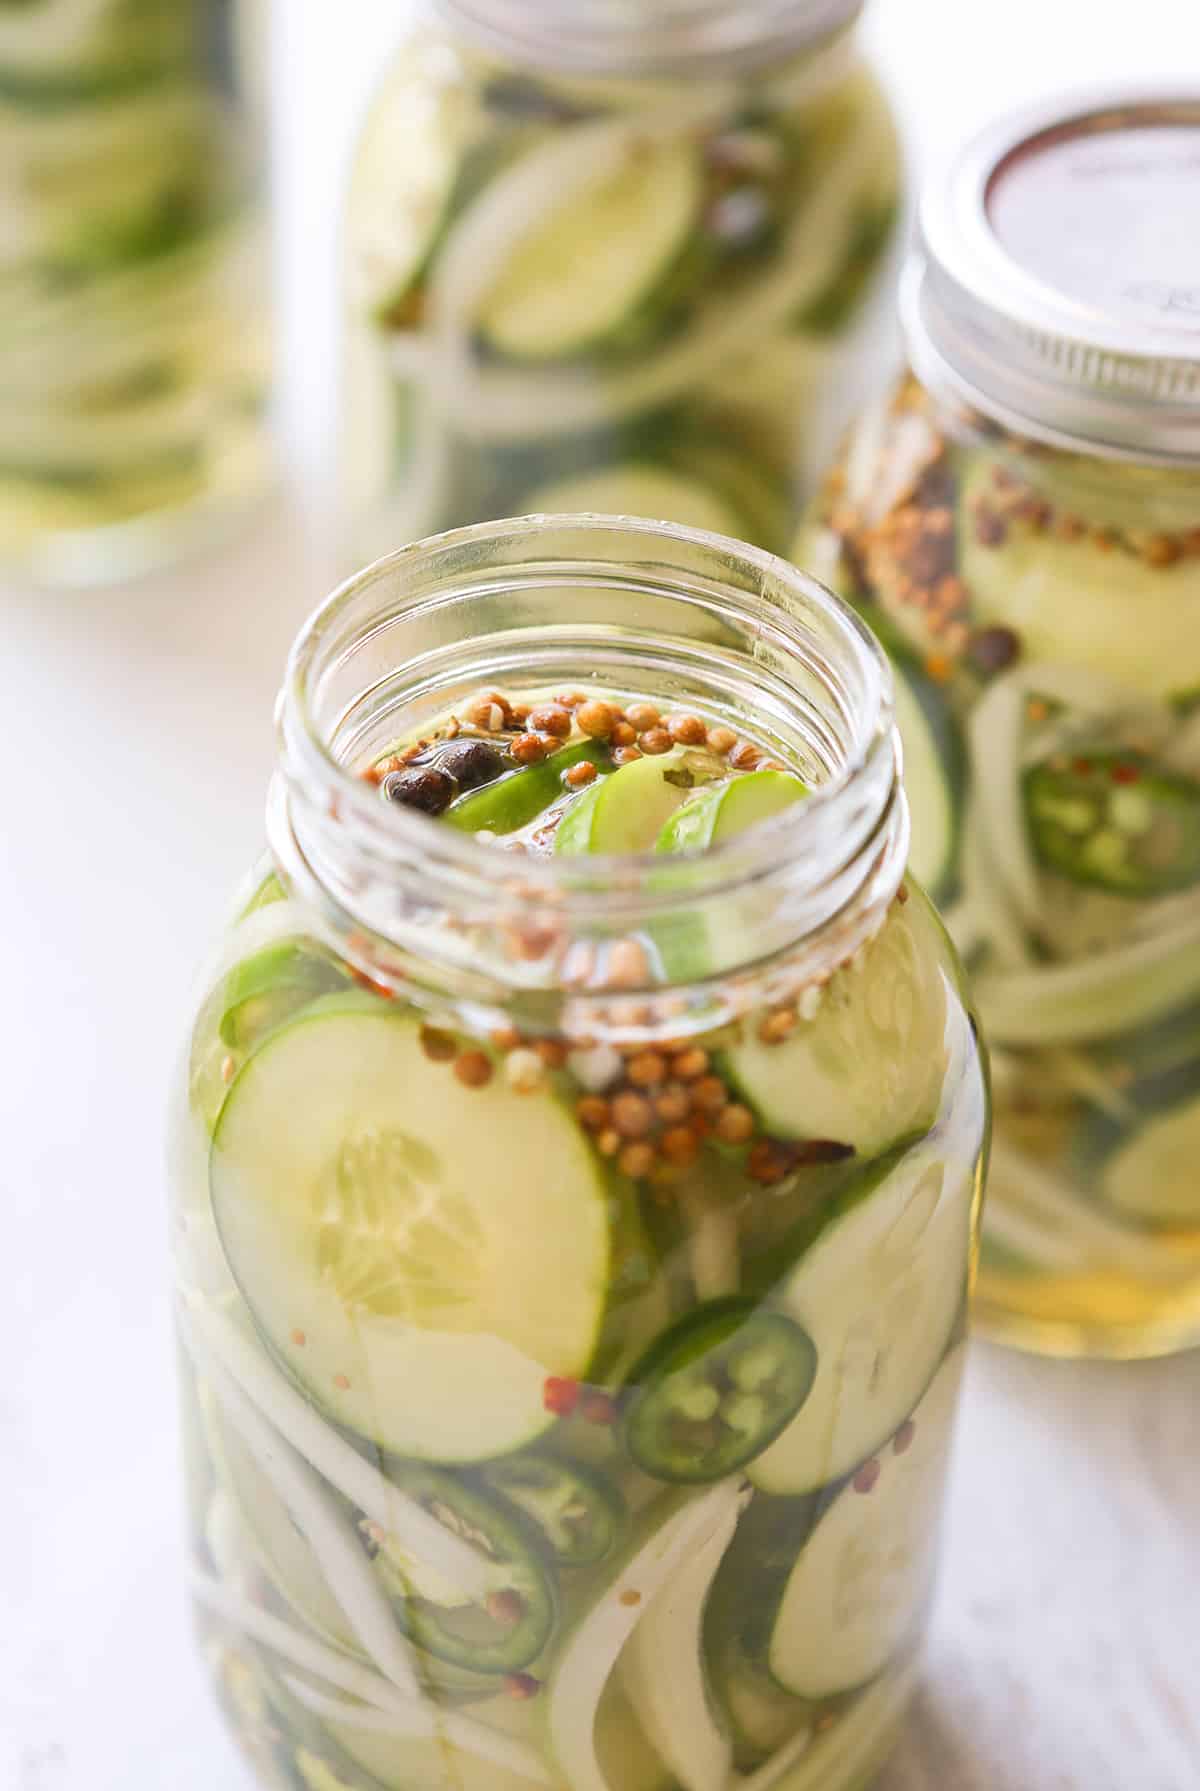 Can Pickles Be Left Out Overnight? 